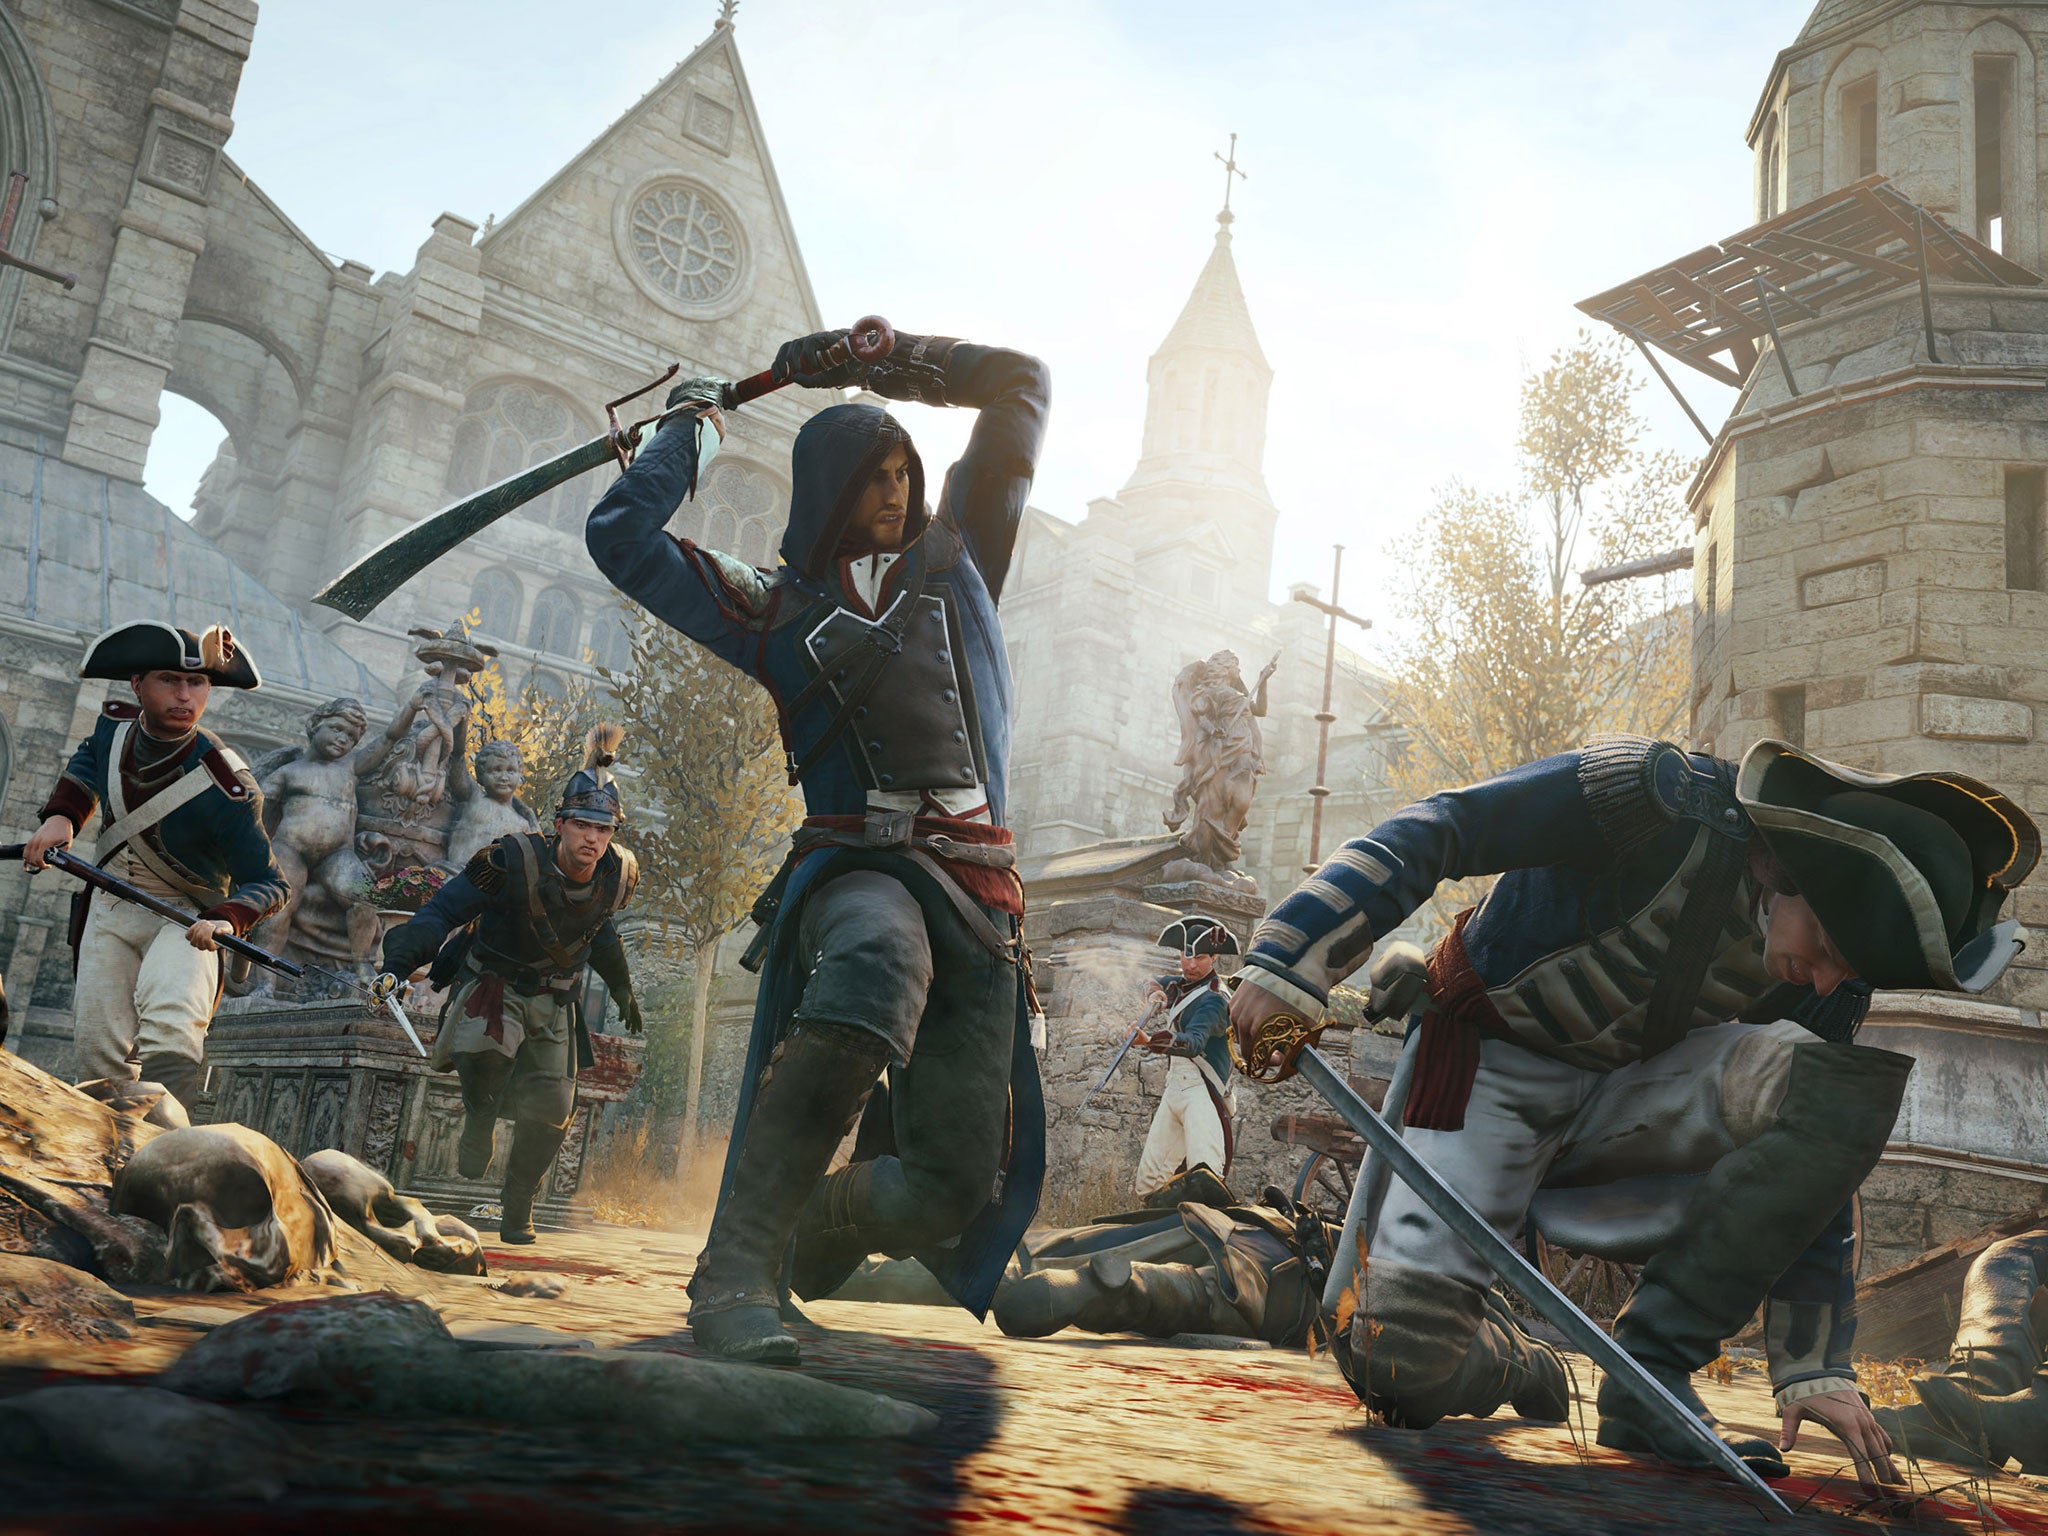 ‘Assassin’s Creed Unity’ portrays the French Revolution, but has it exaggerated the guilt of leader of the Revolution Maximilien François Marie Isidore de Robespierre?